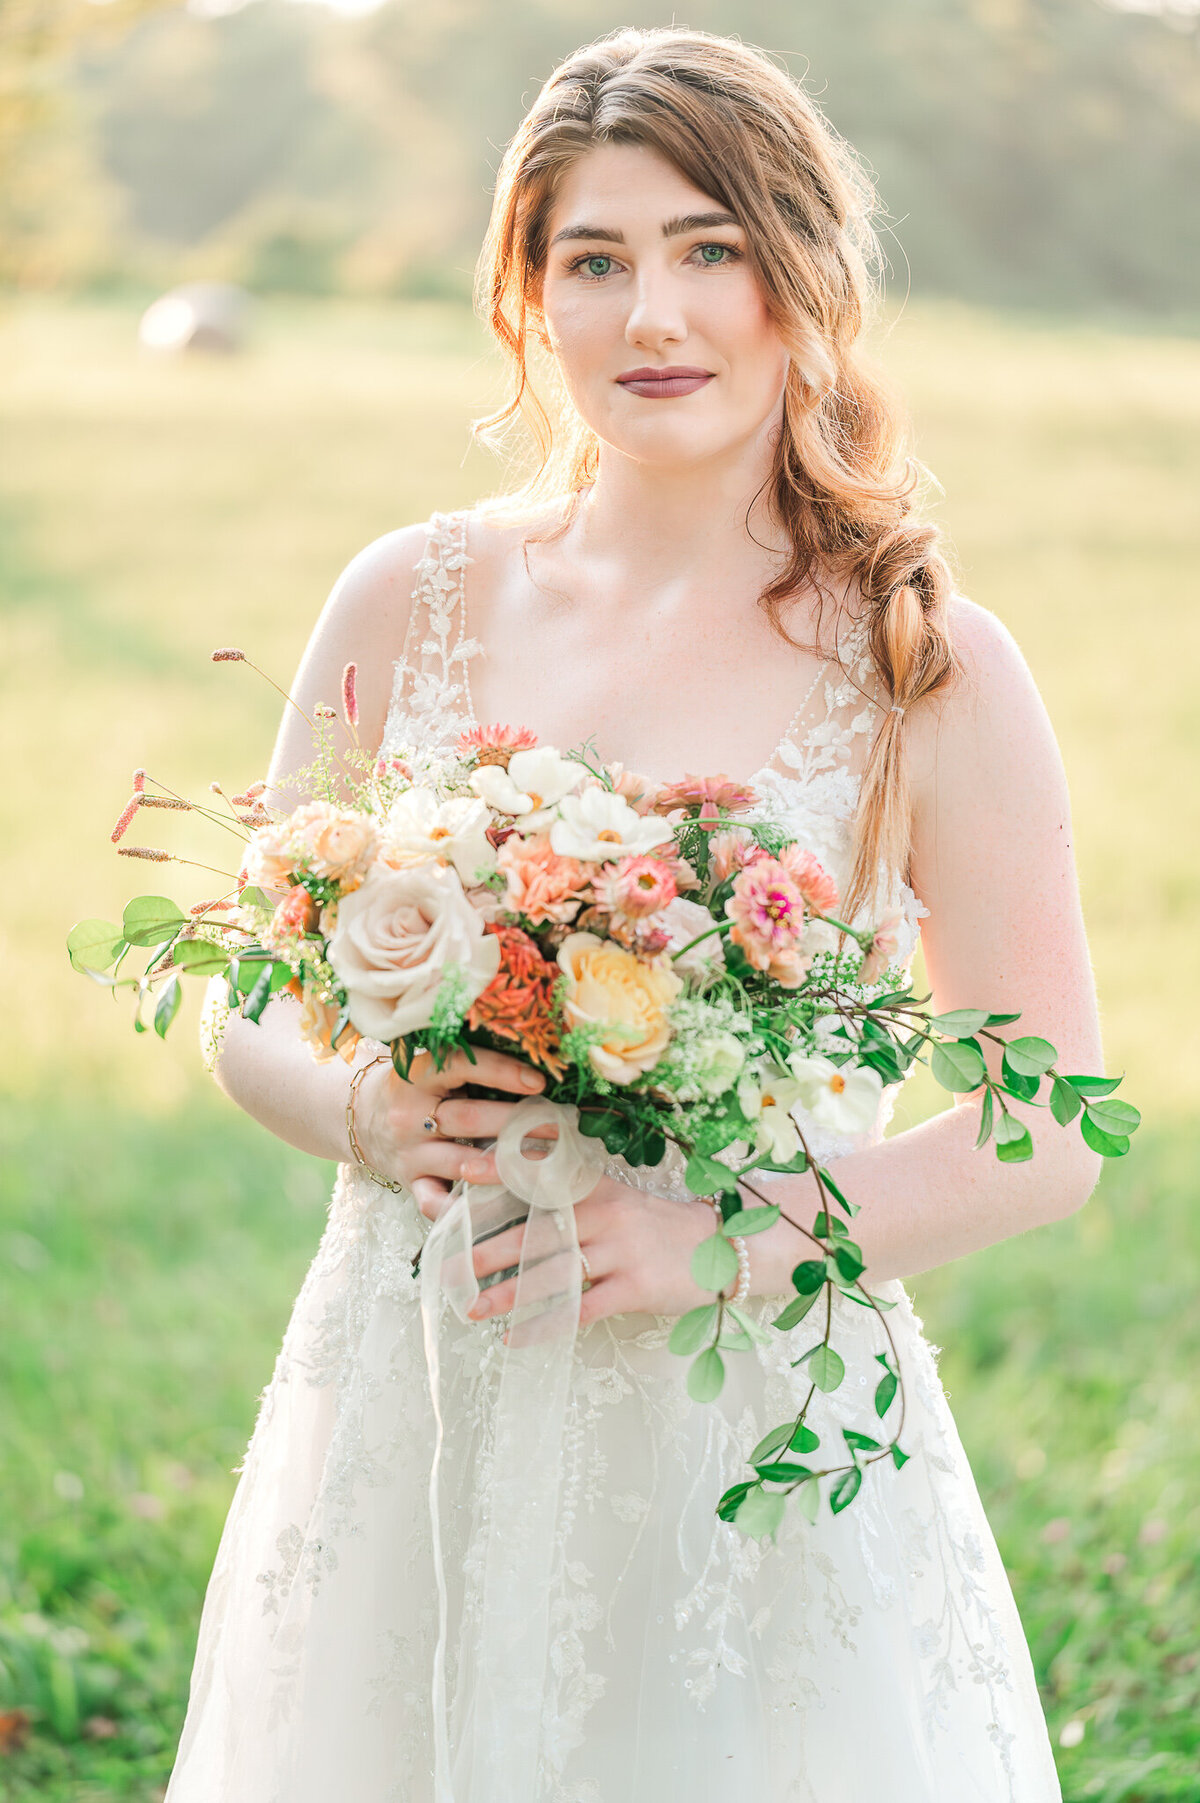 A bride in the North Carolina countryside in the summer holding her wedding bouquet enjoying her North Carolina wedding photos